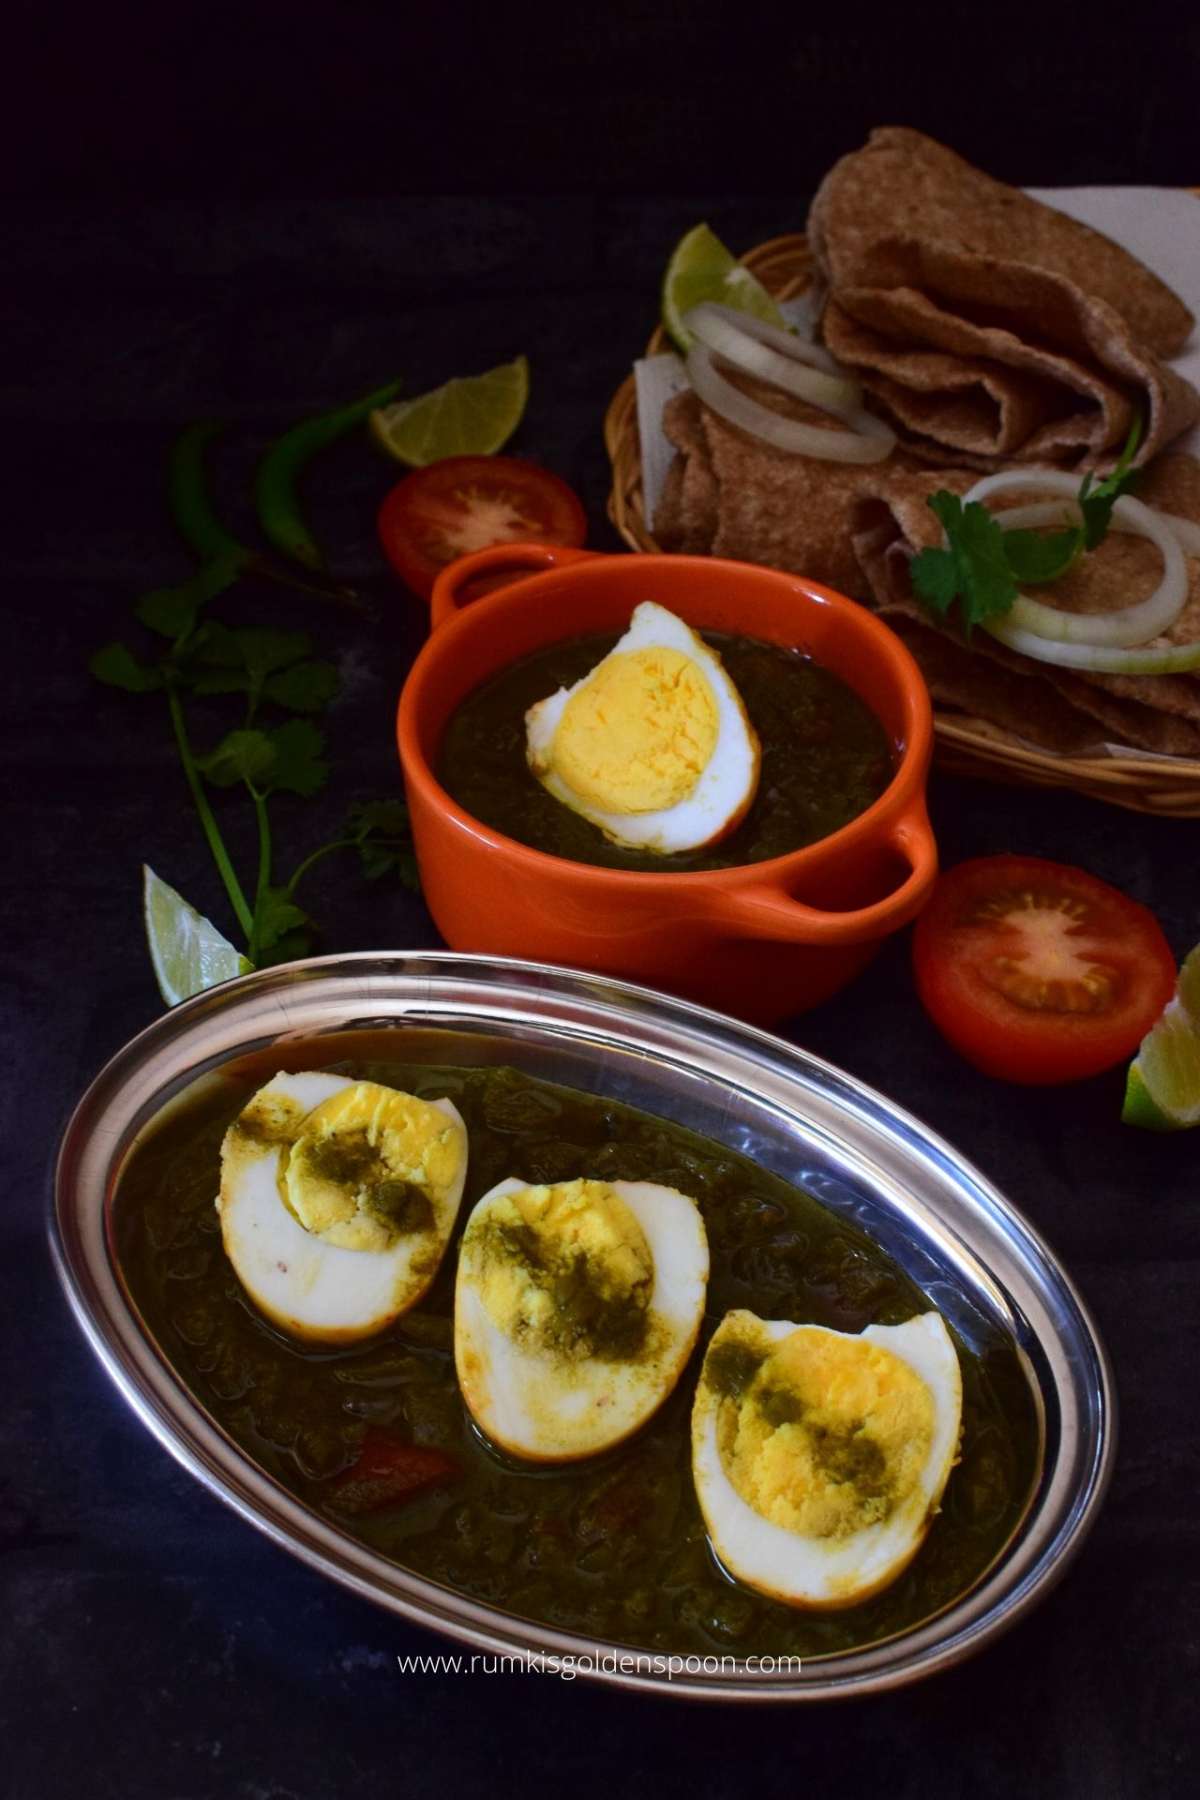 Coriander egg curry, Dhaniya anda curry, egg curry with coriander leaves, hariyali egg curry, hariyali anda curry, egg curry recipe, anda curry, anda curry recipe, recipe for anda curry, egg curry for rice, egg curry for chapathi, south indian egg curry recipe, egg curry recipe for rice, egg curry recipe easy, indian egg curry, indian egg curry recipe, north indian egg curry recipe, egg curry indian style, best indian egg curry recipe, how to make egg curry, Rumki's Golden Spoon